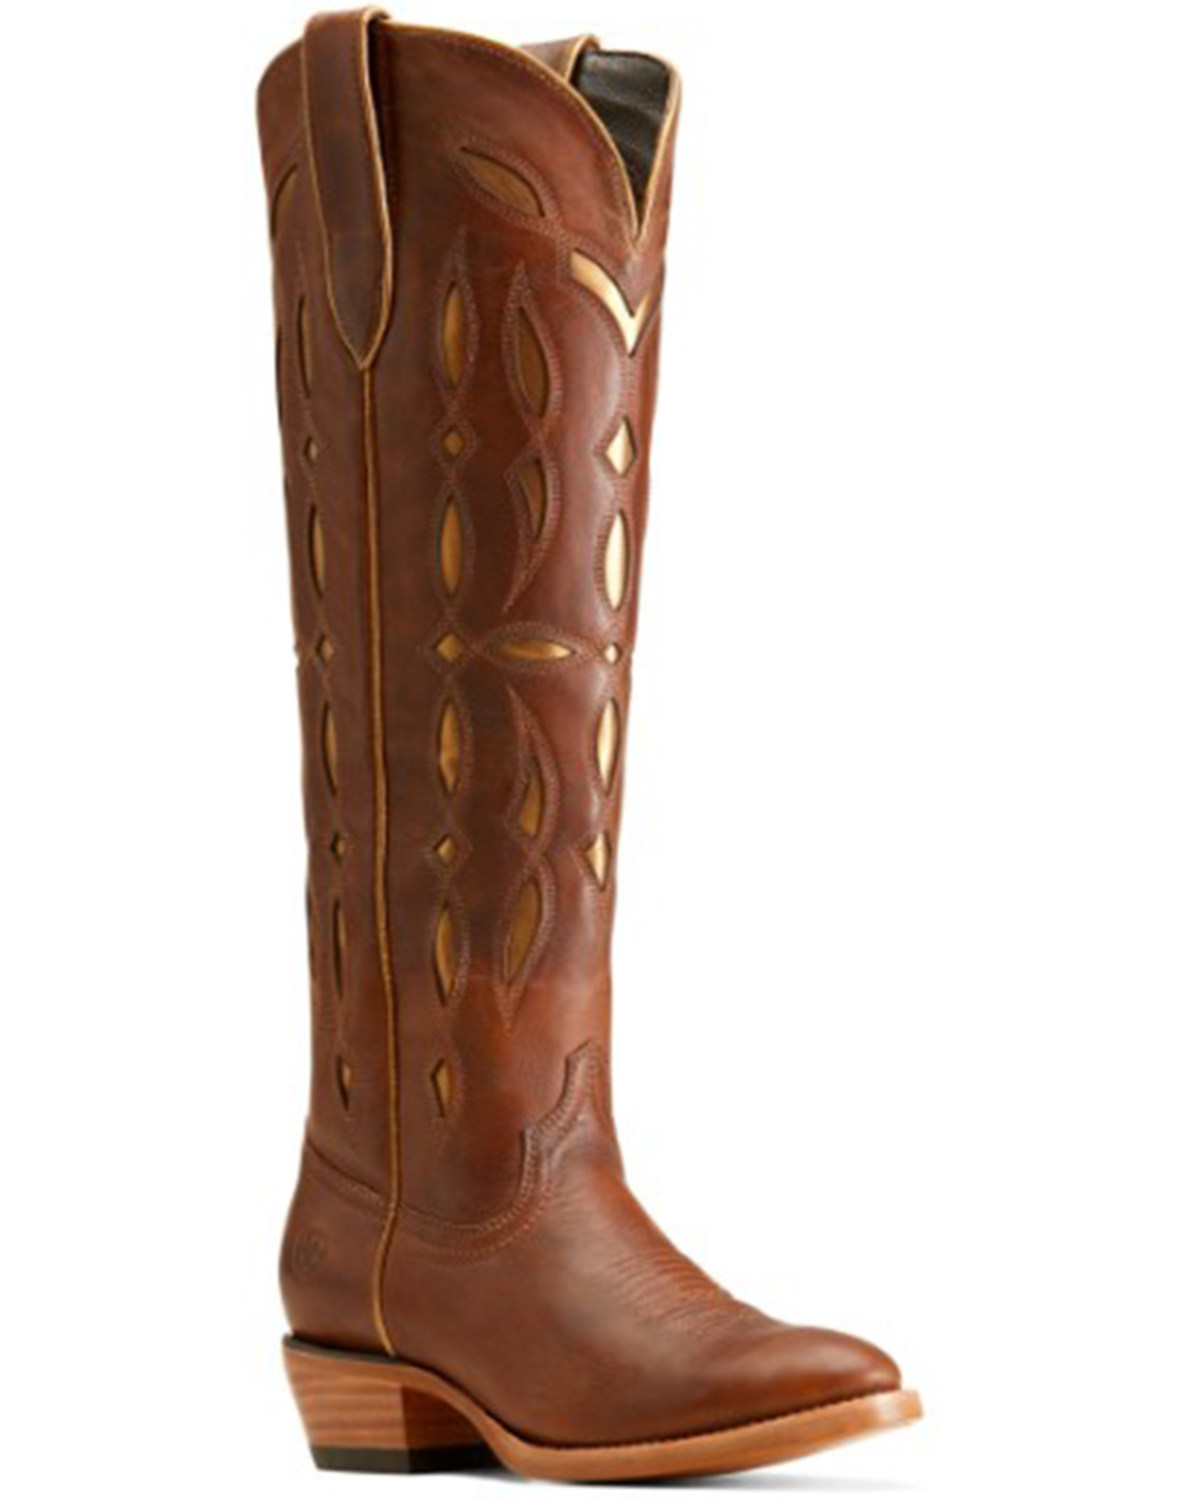 Ariat Women's Saylor StretchFit Western Boots - Round Toe